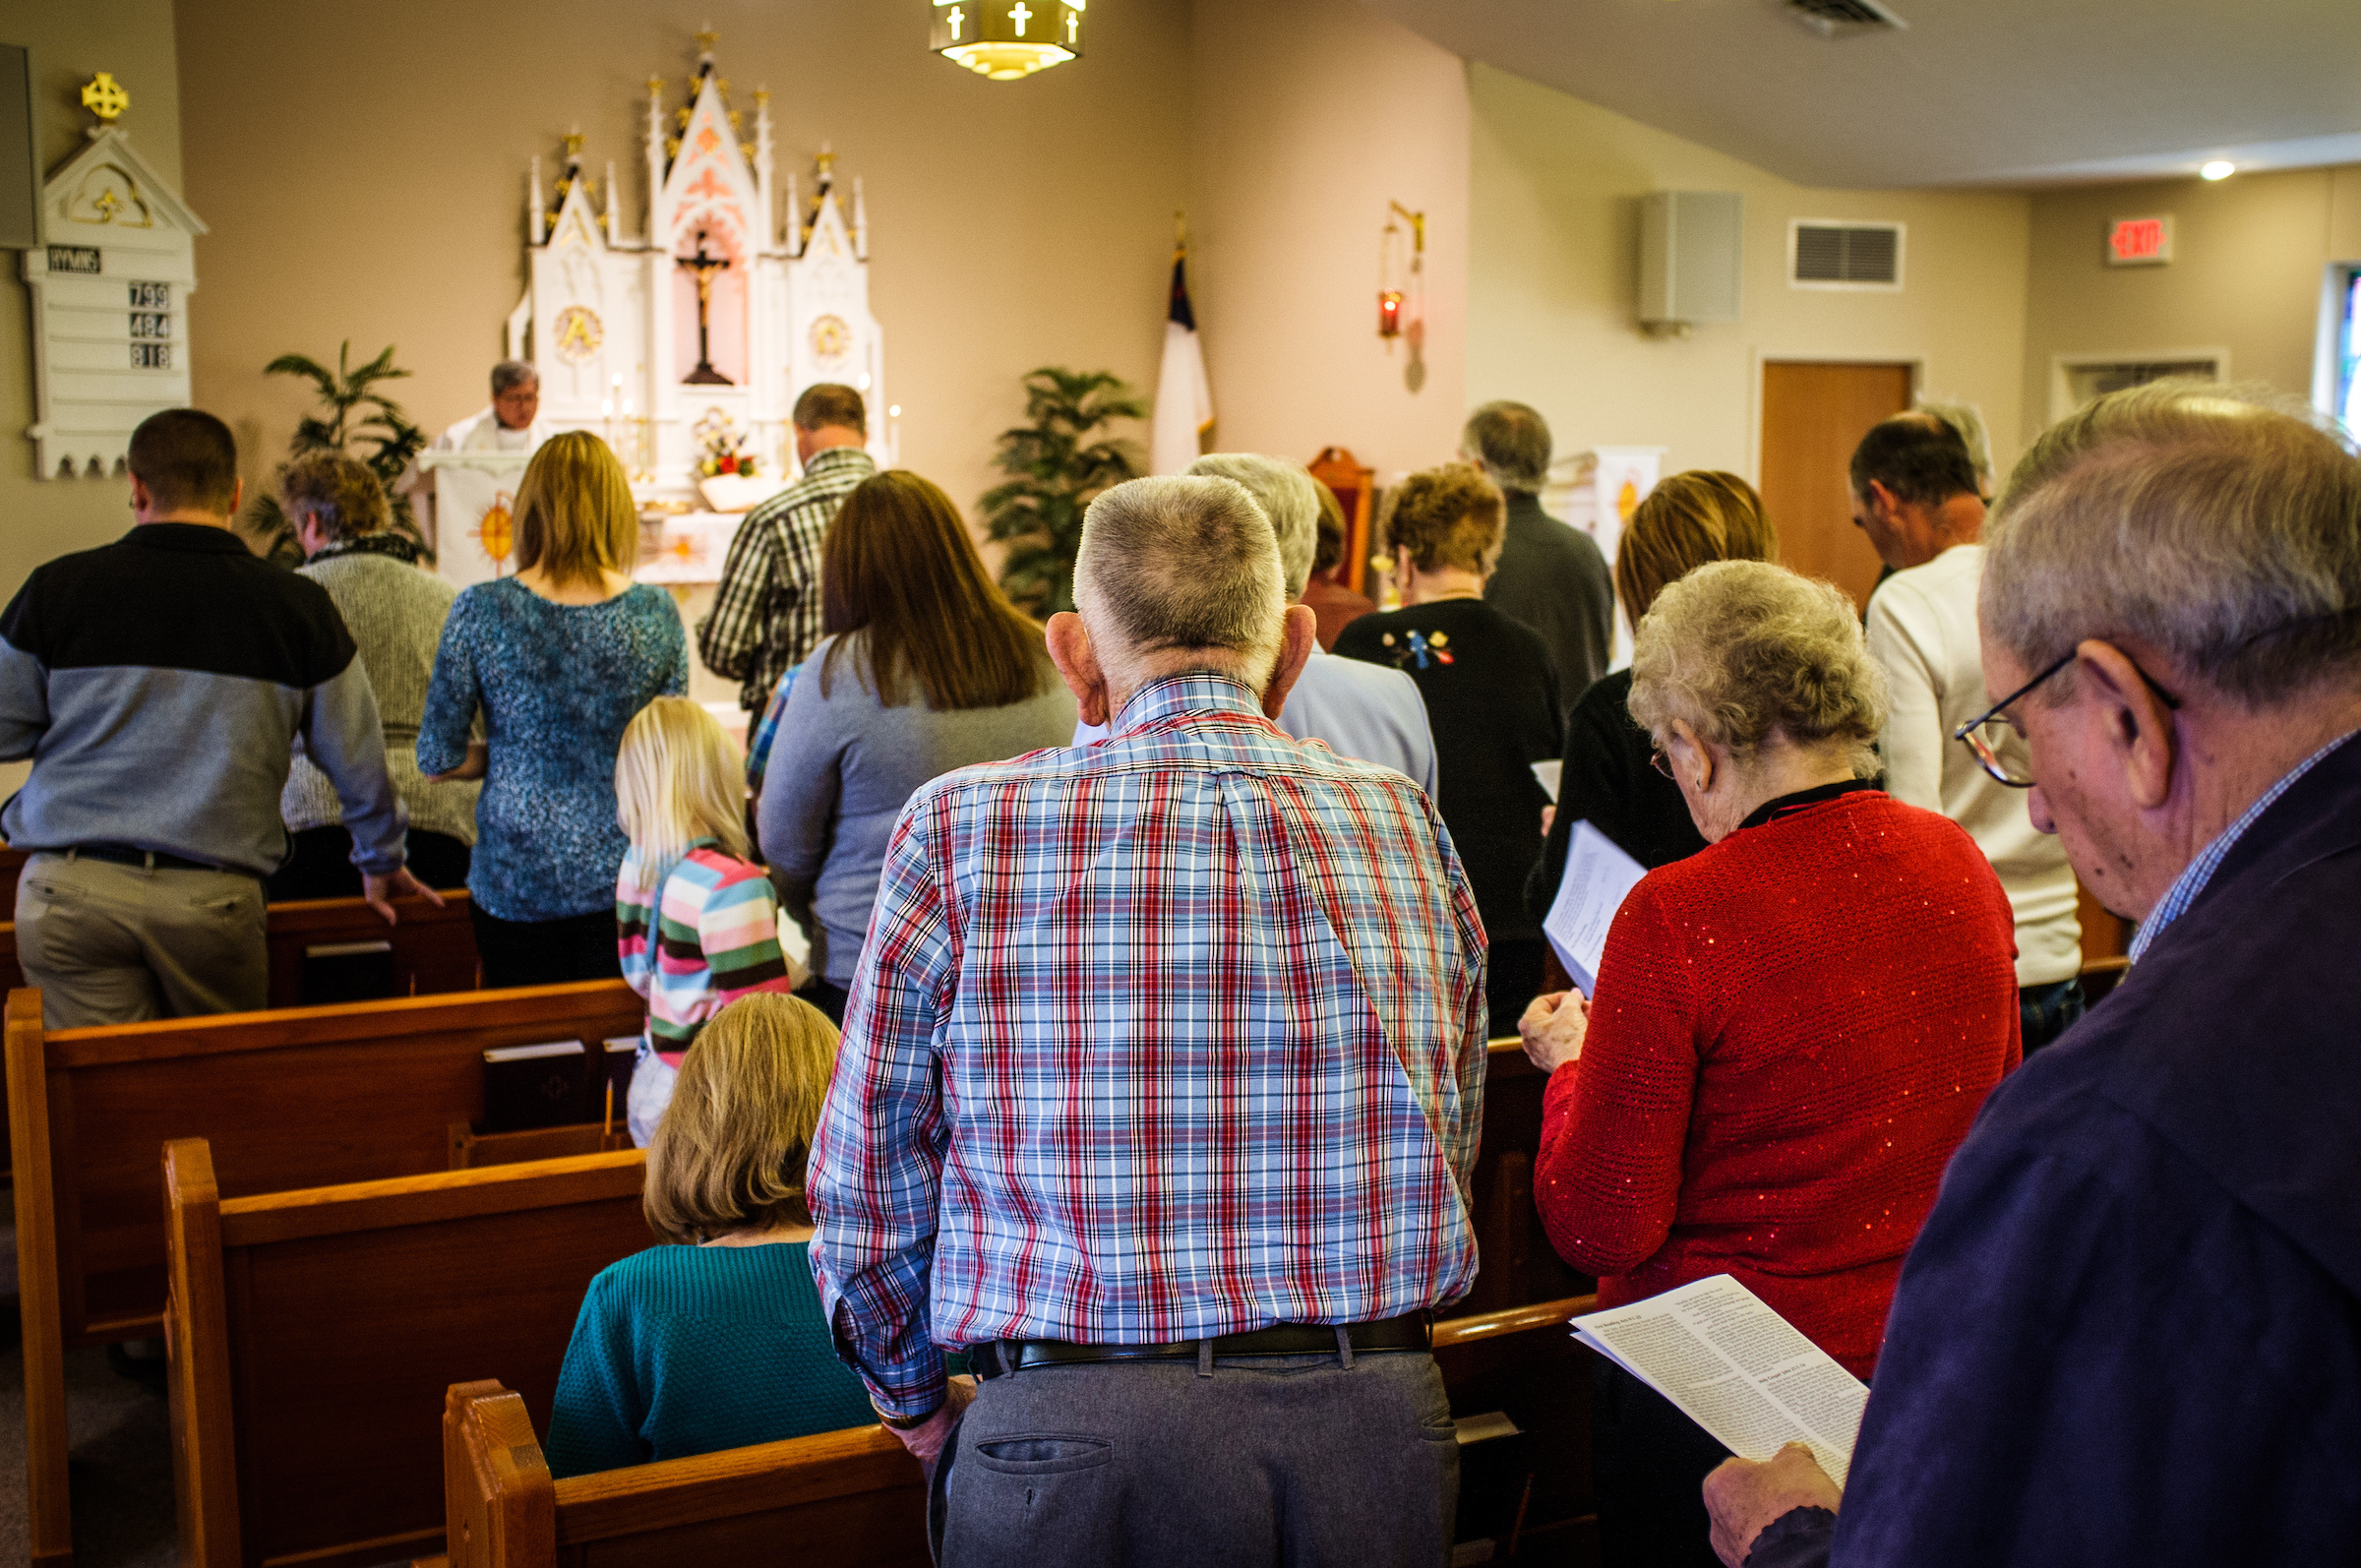 Parishioners and guests attend worship at St. Paul Lutheran Church-Dewberry on Sunday, April 10, 2016, in Cross Plains, Ind. LCMS Communications/Erik M. Lunsford